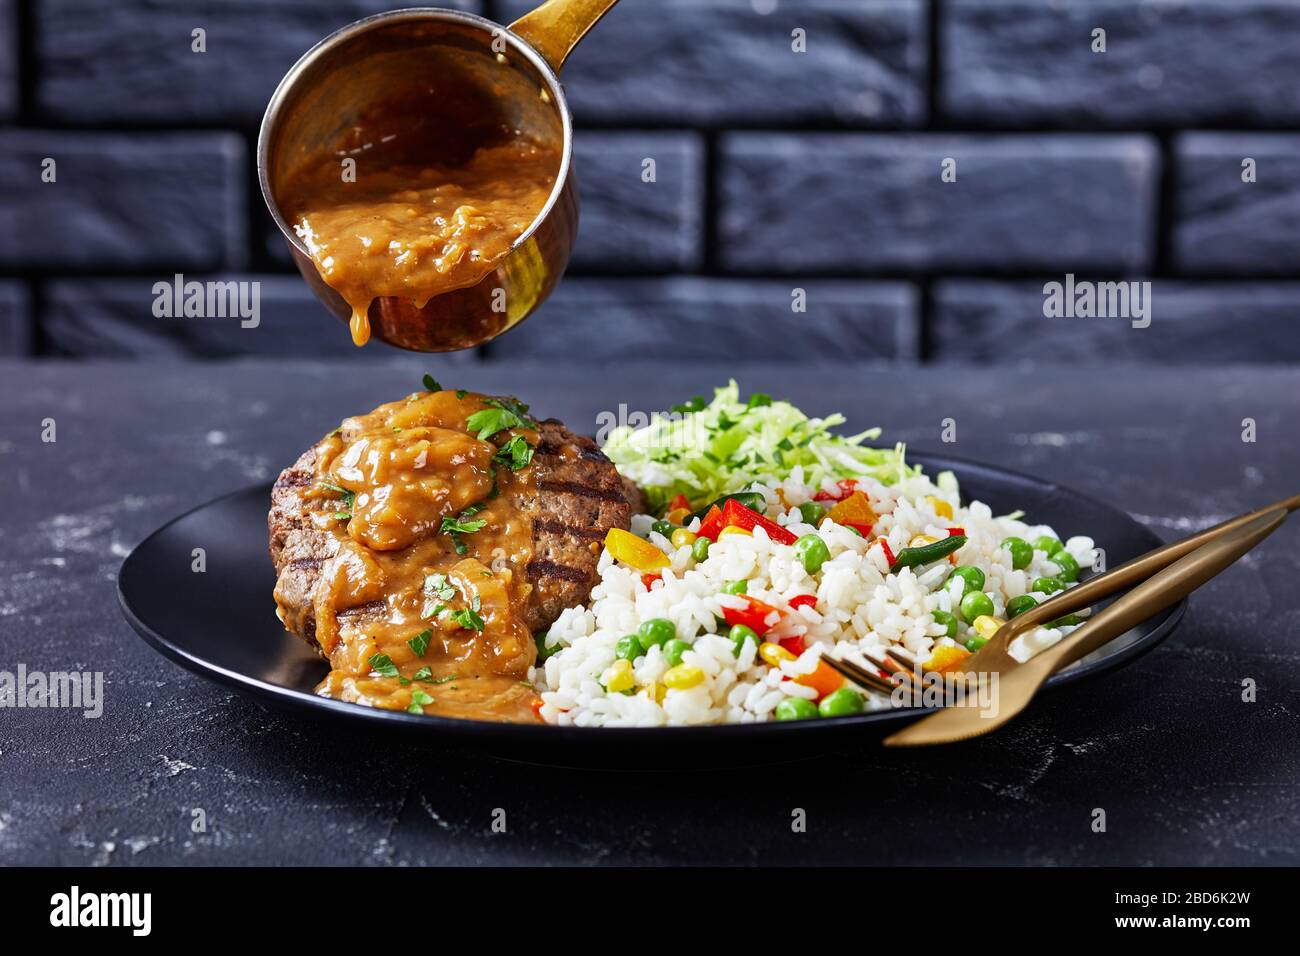 close-up of a portion of grilled ground beef steaks has been pouring with onion gravy, coleslaw and rice mixed with vegetables on a black plate on a c Stock Photo